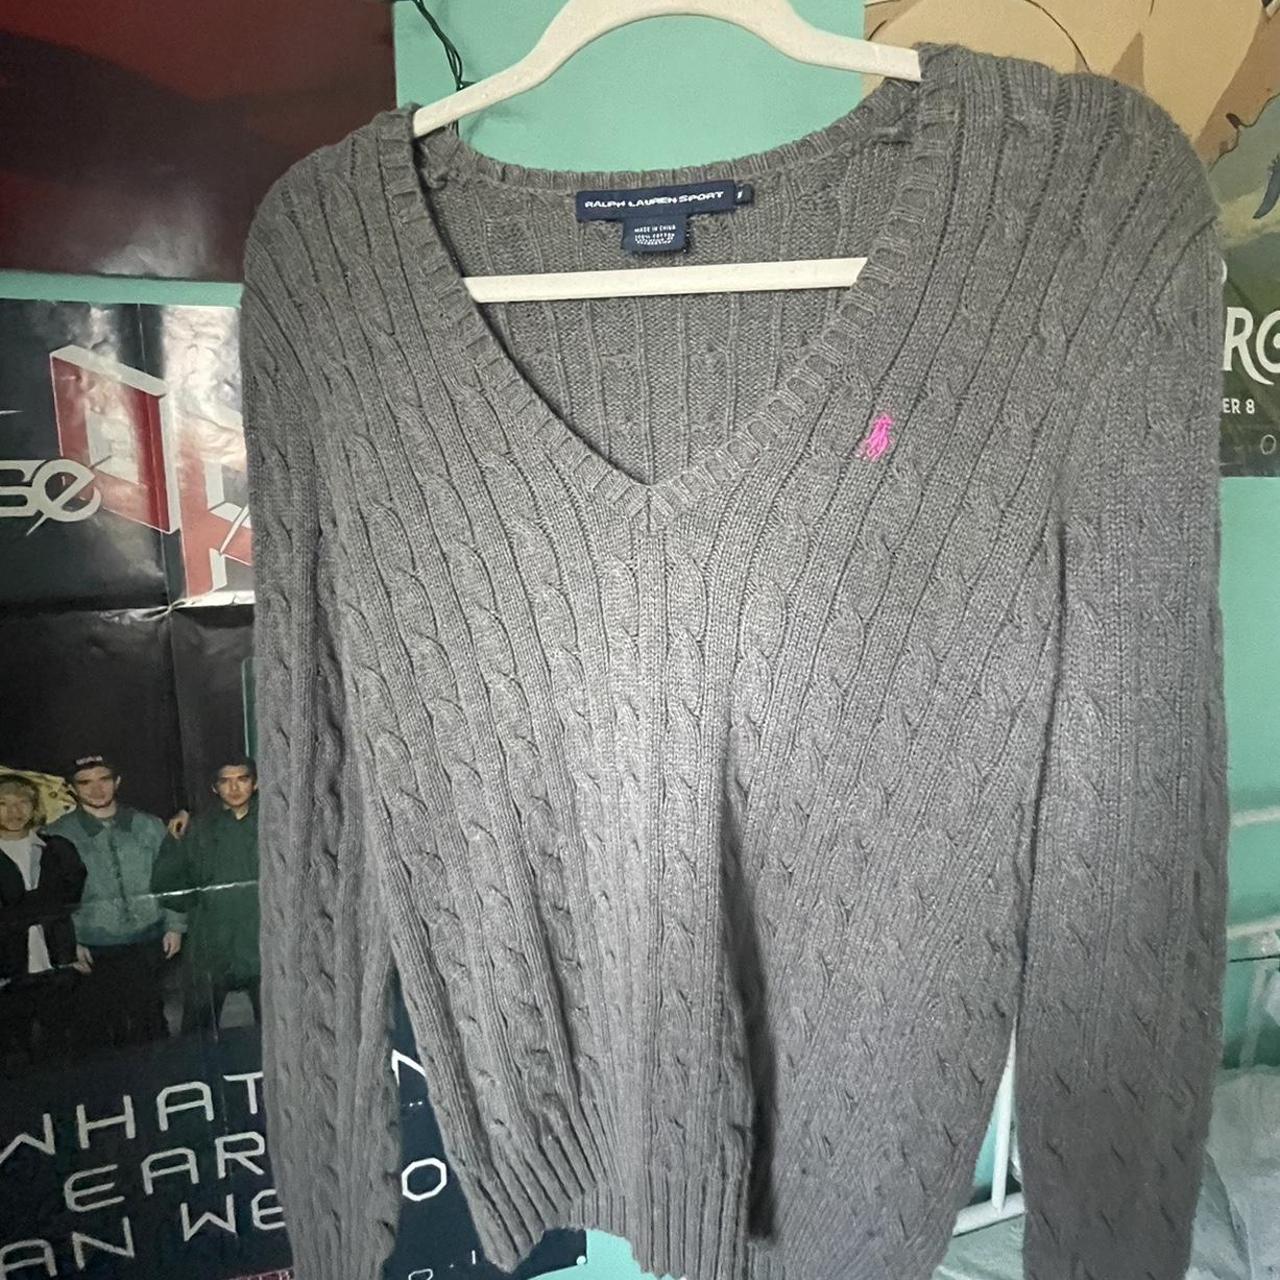 LOFT Lou and Grey Star V-Neck Sweater in White, Red, - Depop